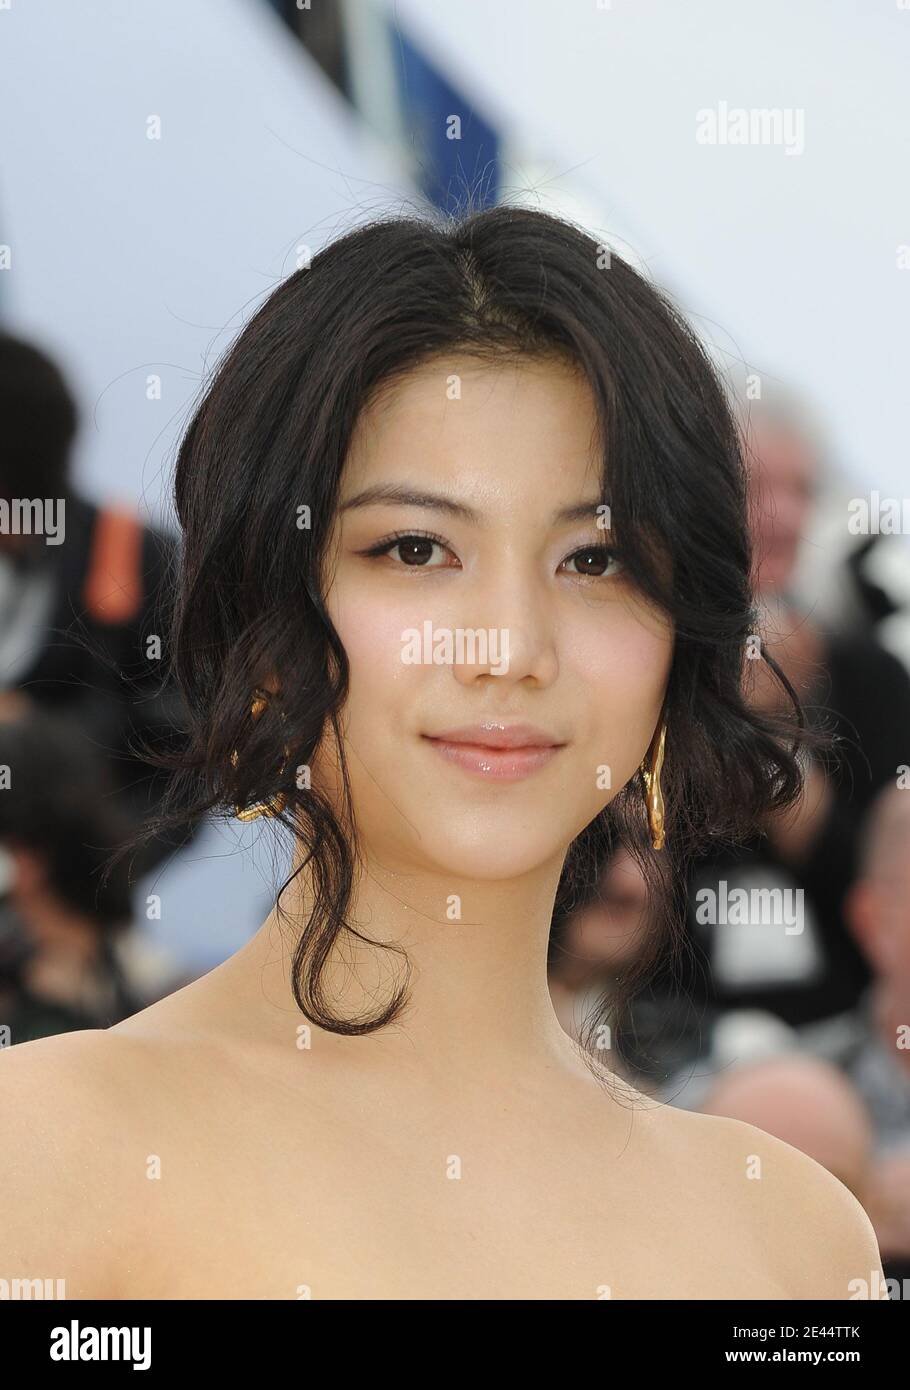 Kim Ok-Vin attends the 'Thirst' Photocall held at the Palais Des Festivals during the 62nd International Cannes Film Festival in Cannes, France on May 15, 2009. Photo by Nebinger-Orban/ABACAPRESS.COM Stock Photo